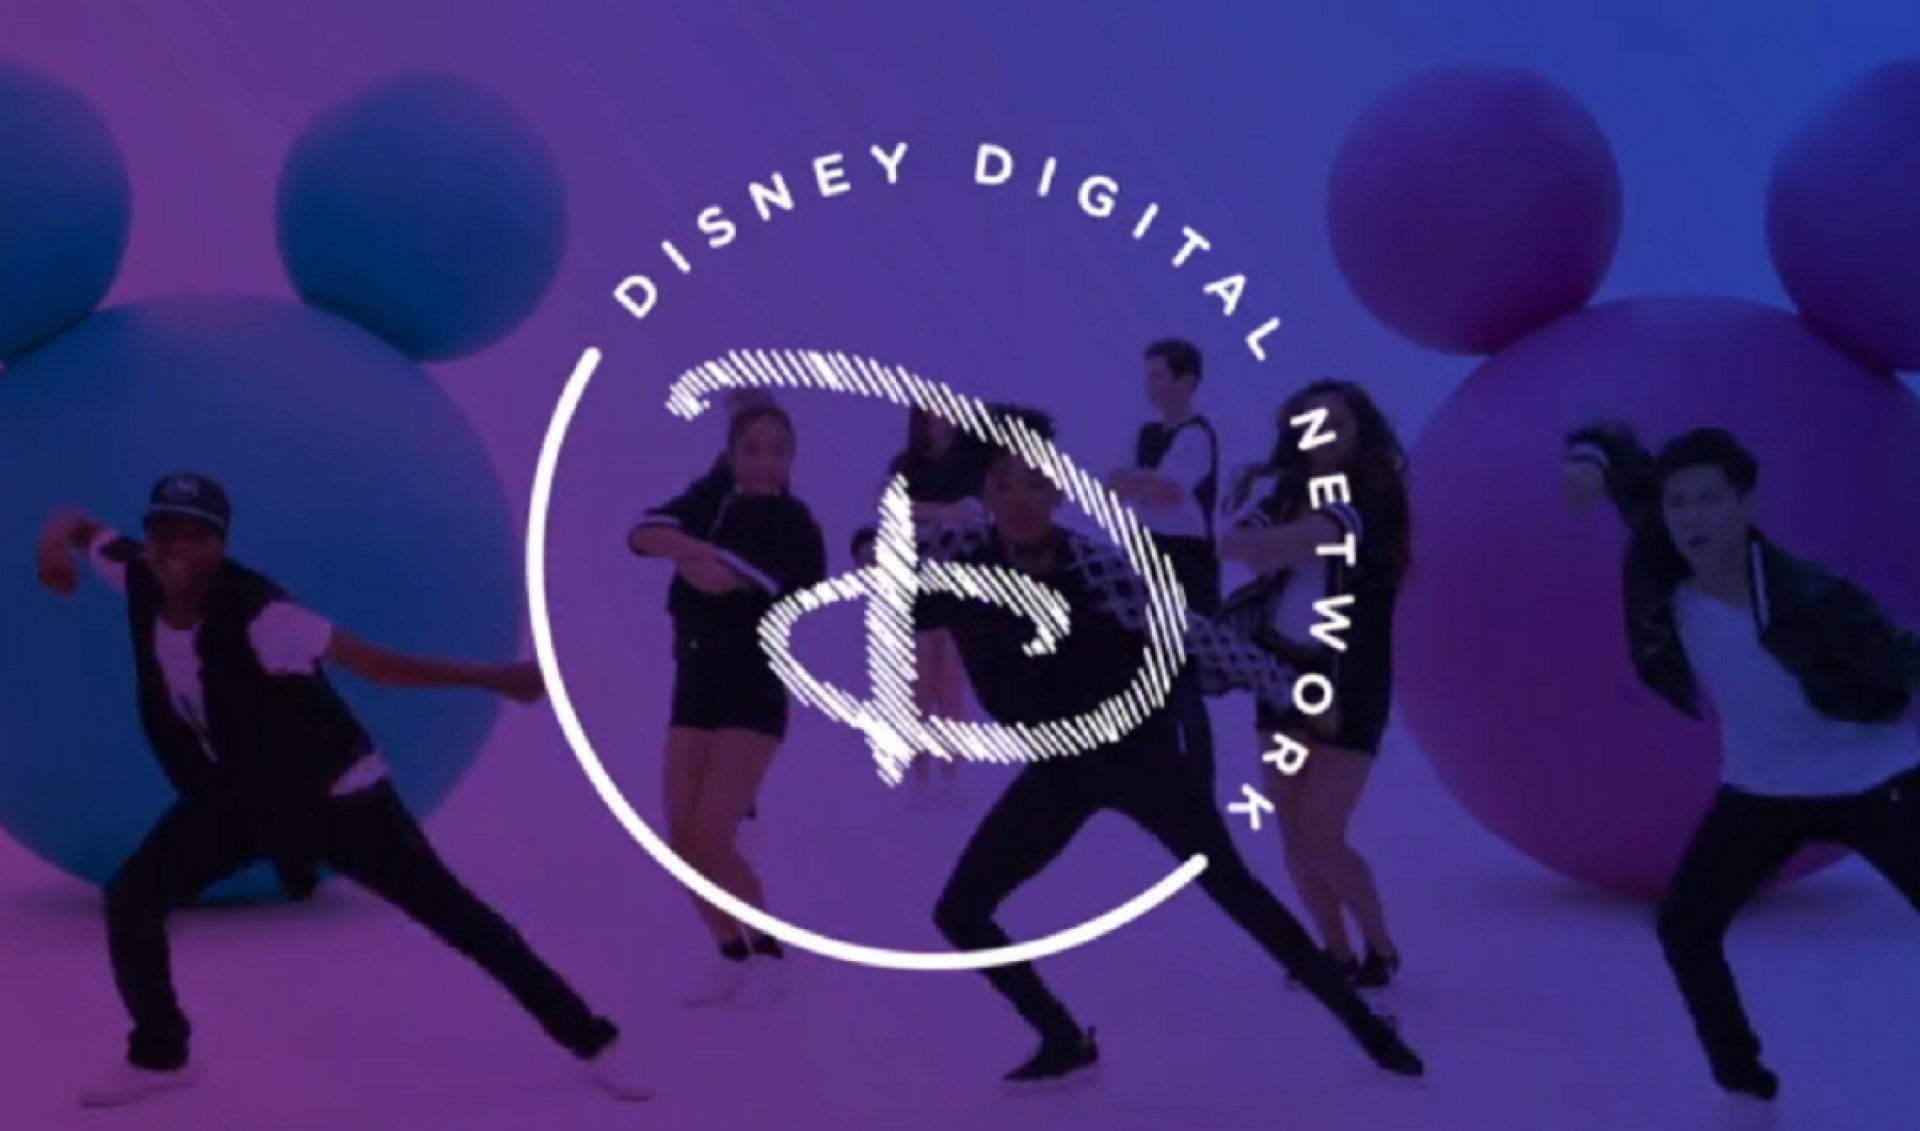 Disney Digital Network Lays Off A Number Of Employees As Part Of Shifting Focus To SVOD